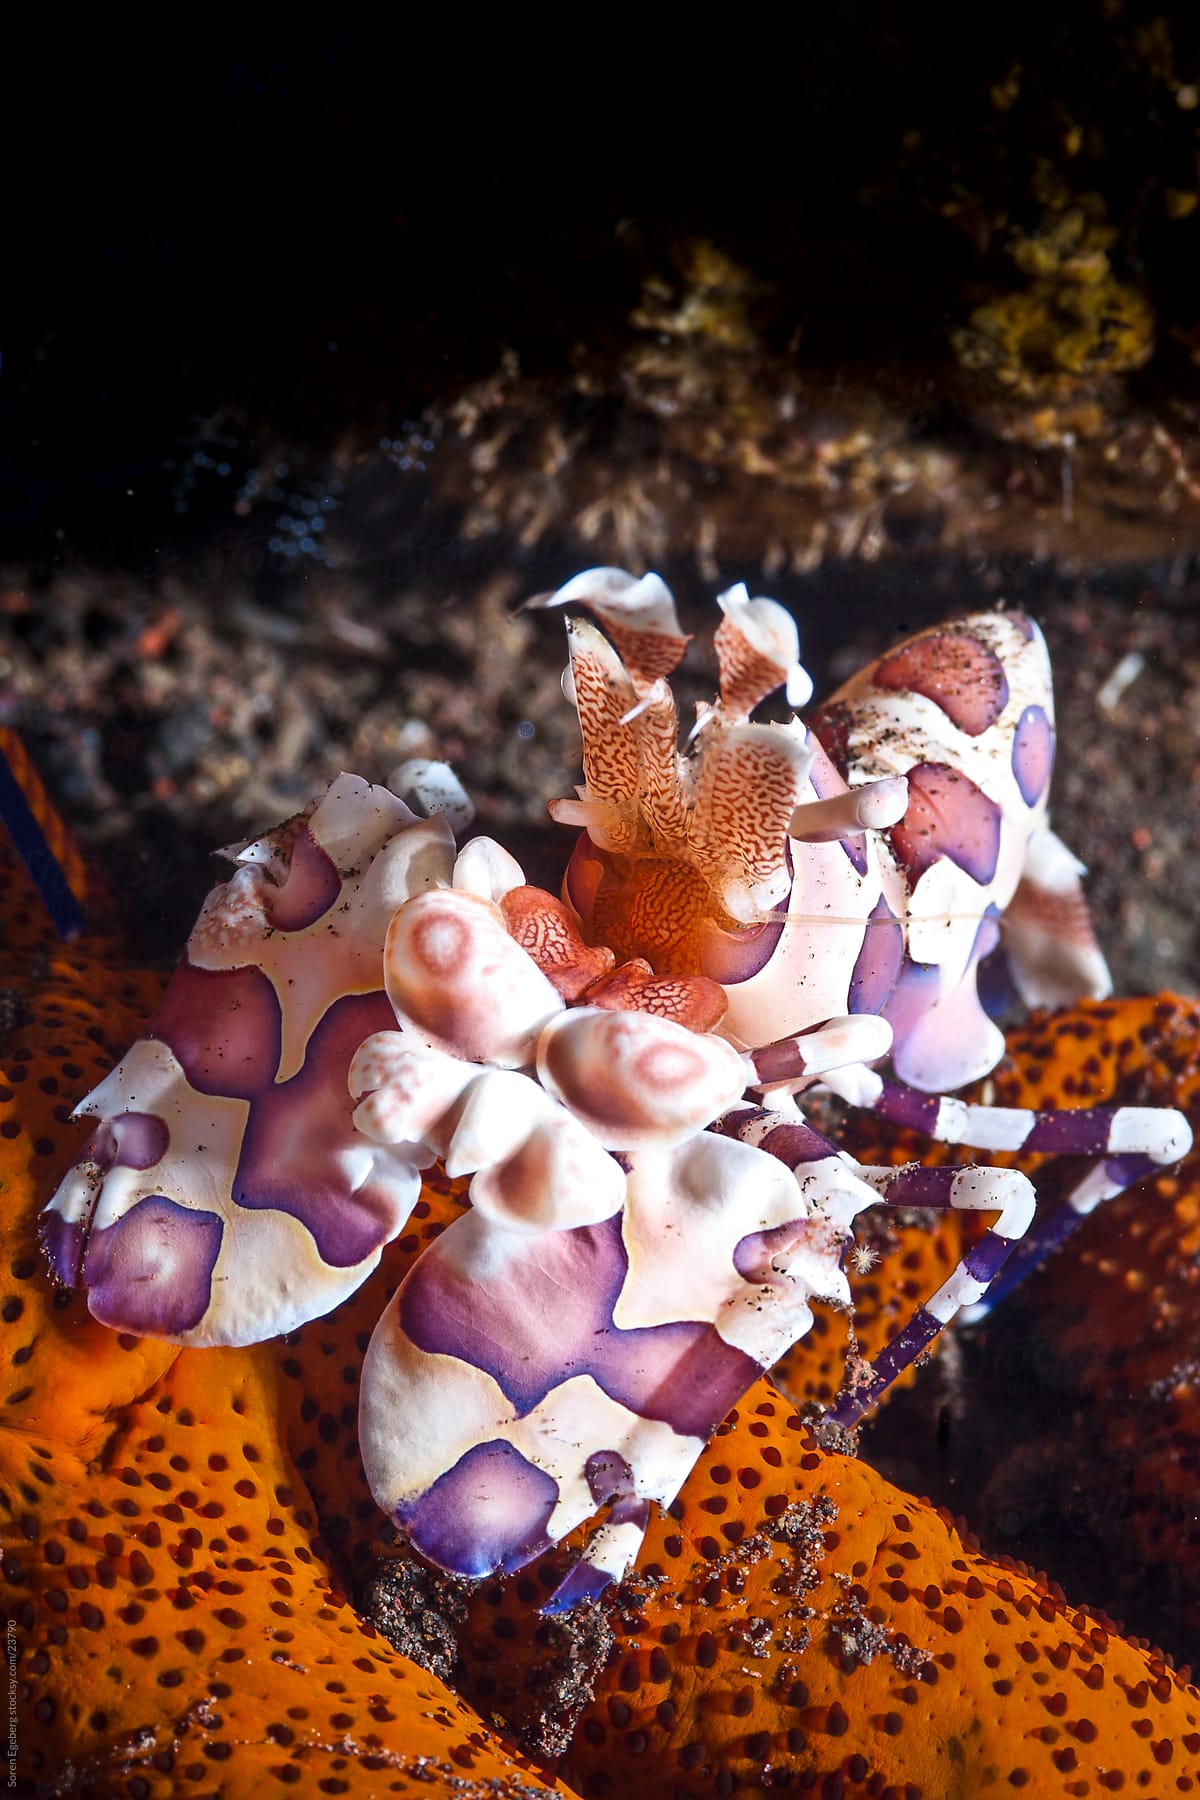 Harlequin Shrimps feeding on seastar on the coral reef  underwater in Thailand